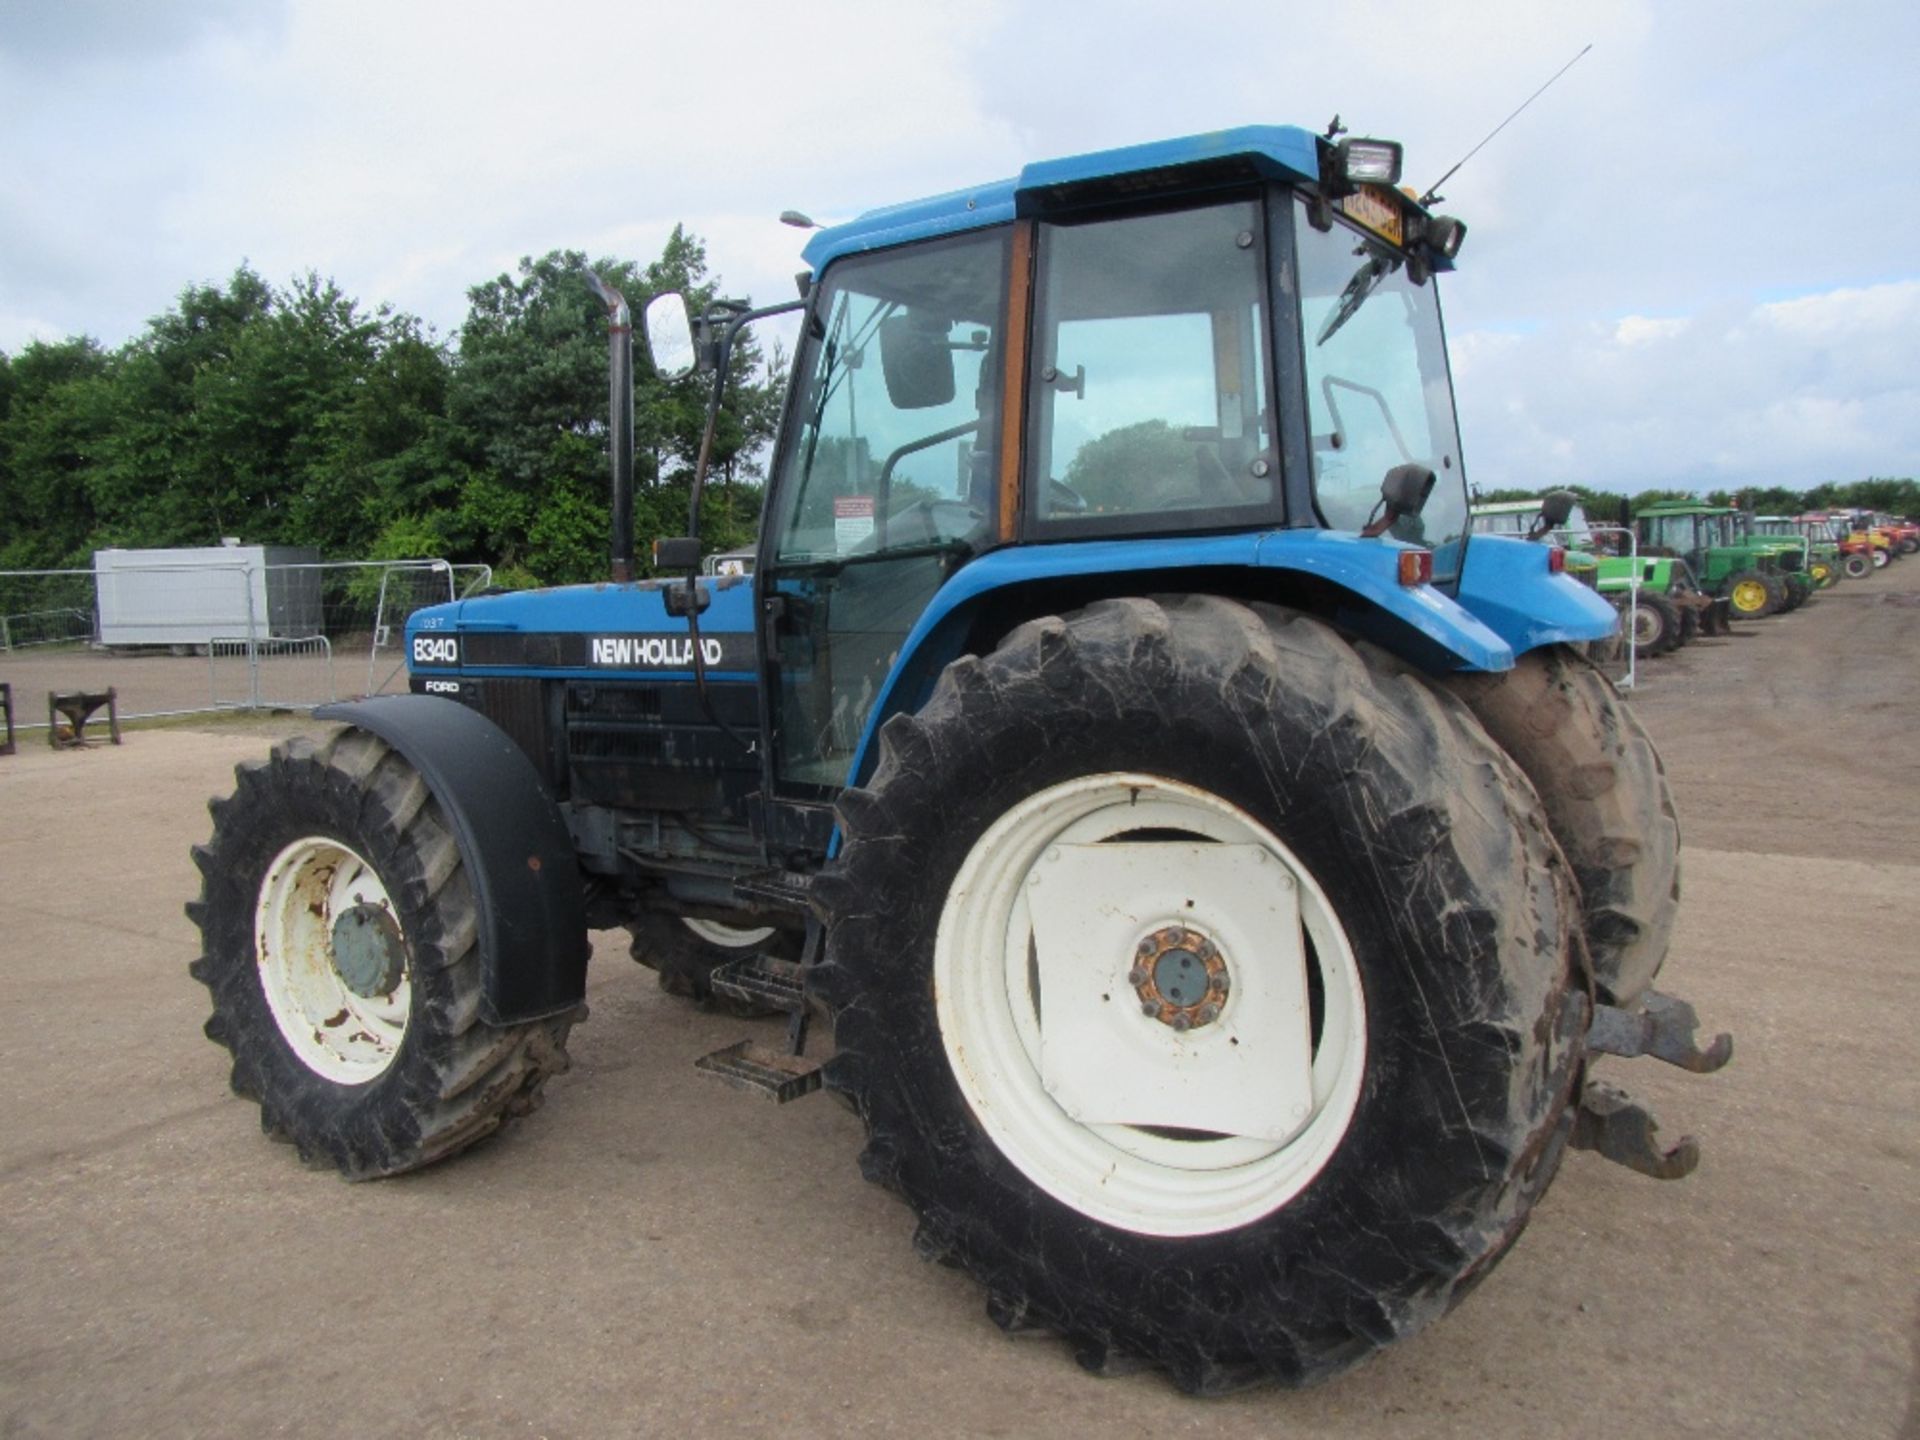 New Holland 8340 SLE 4wd Tractor. V5 will be supplied Reg. No. N243 SCN Ser No 025324B - Image 9 of 17